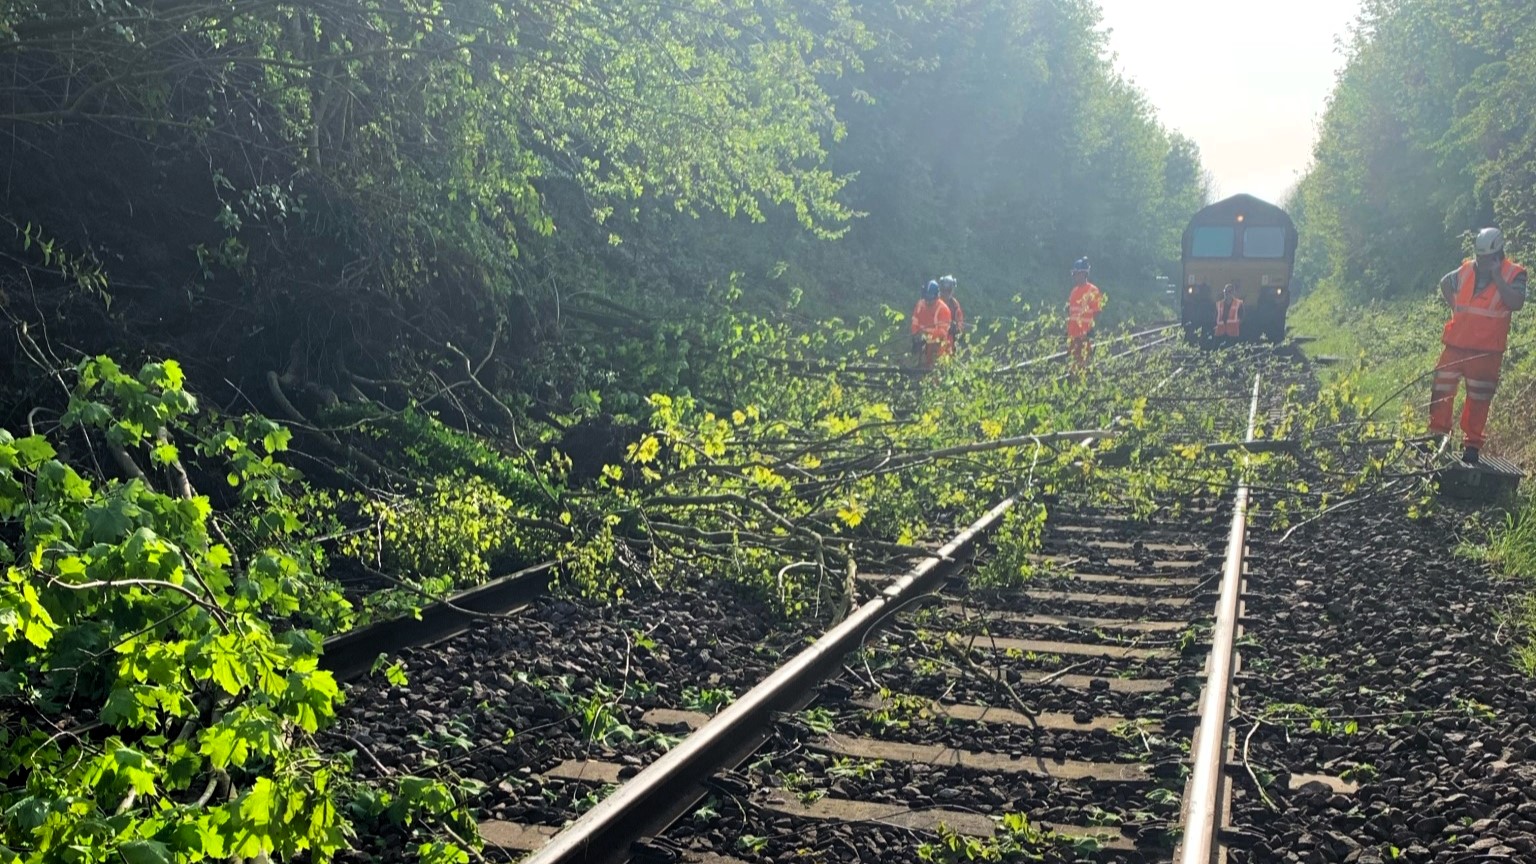 Trees have fallen on to a railway line blocking it in front of a train. The trees have fallen due to a landslide on the slope next to the track.